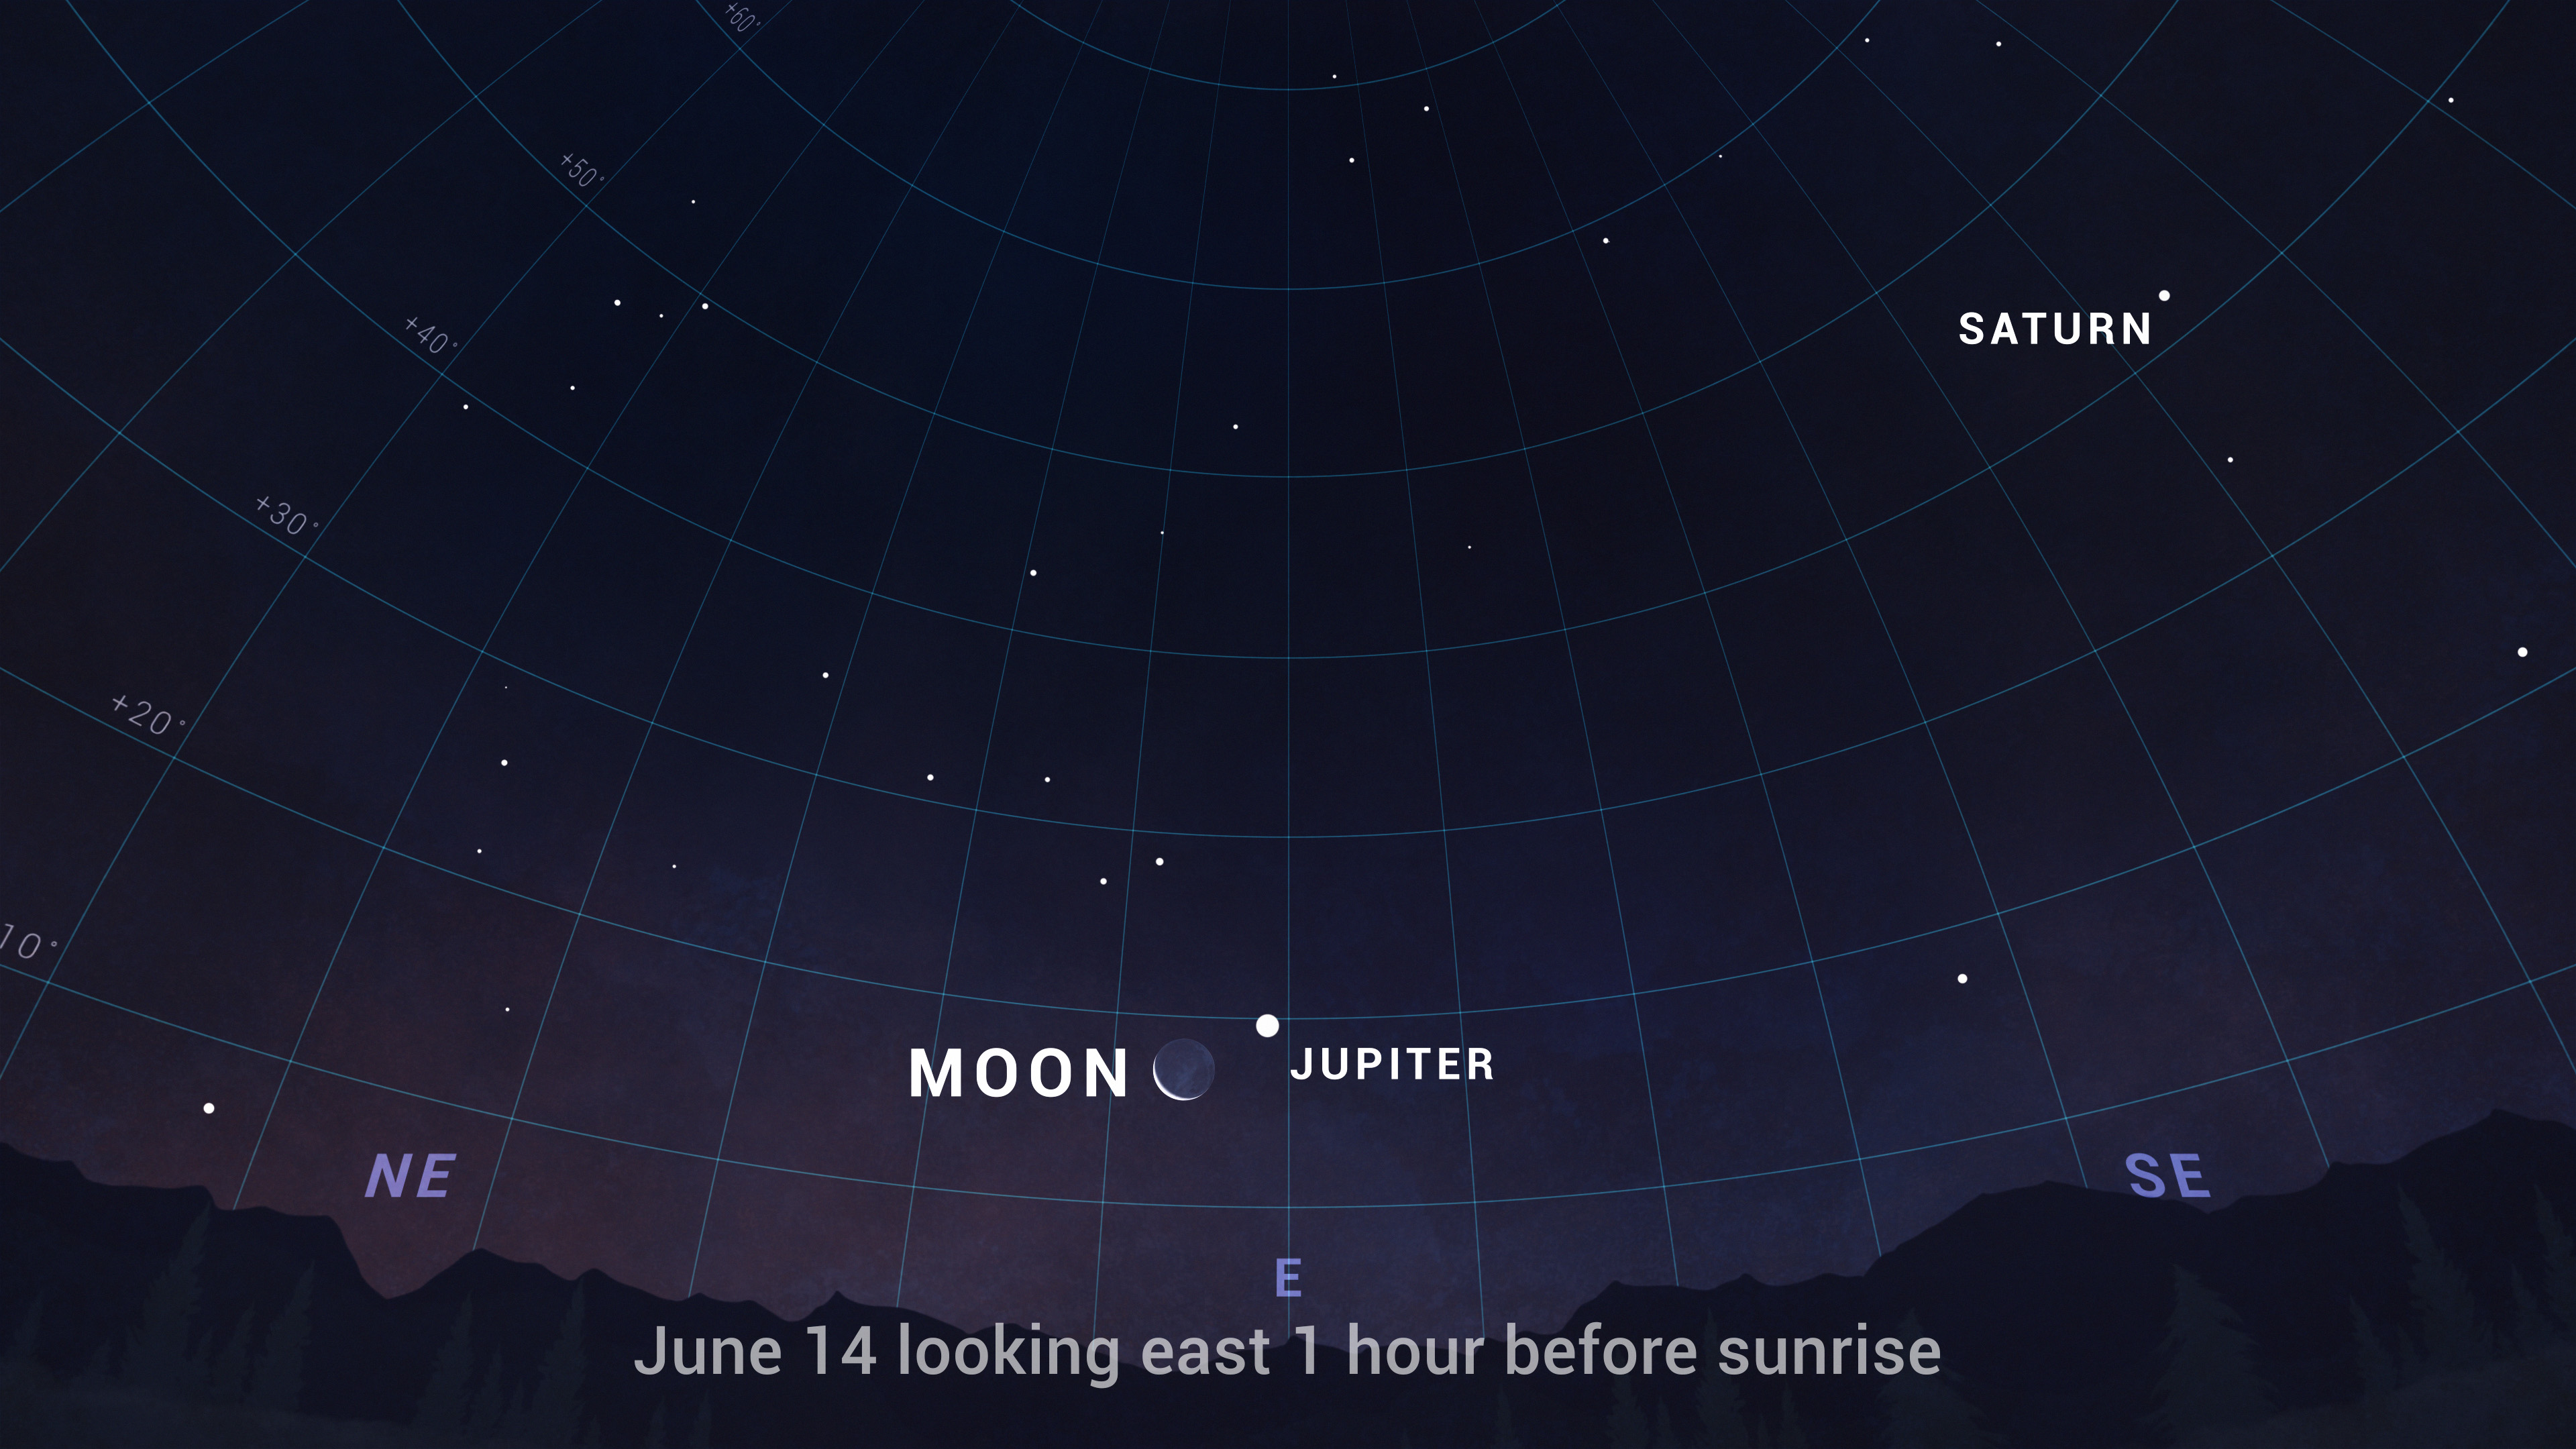 An illustrated sky chart shows the evening sky facing south about an hour after sunset in June. Bright star Spica is depicted as a prominent white dot near center, being about halfway up the sky. Bright star Arcturus is shown as a similarly sized dot near the top of the image, just left of center, being quite high up in the sky.